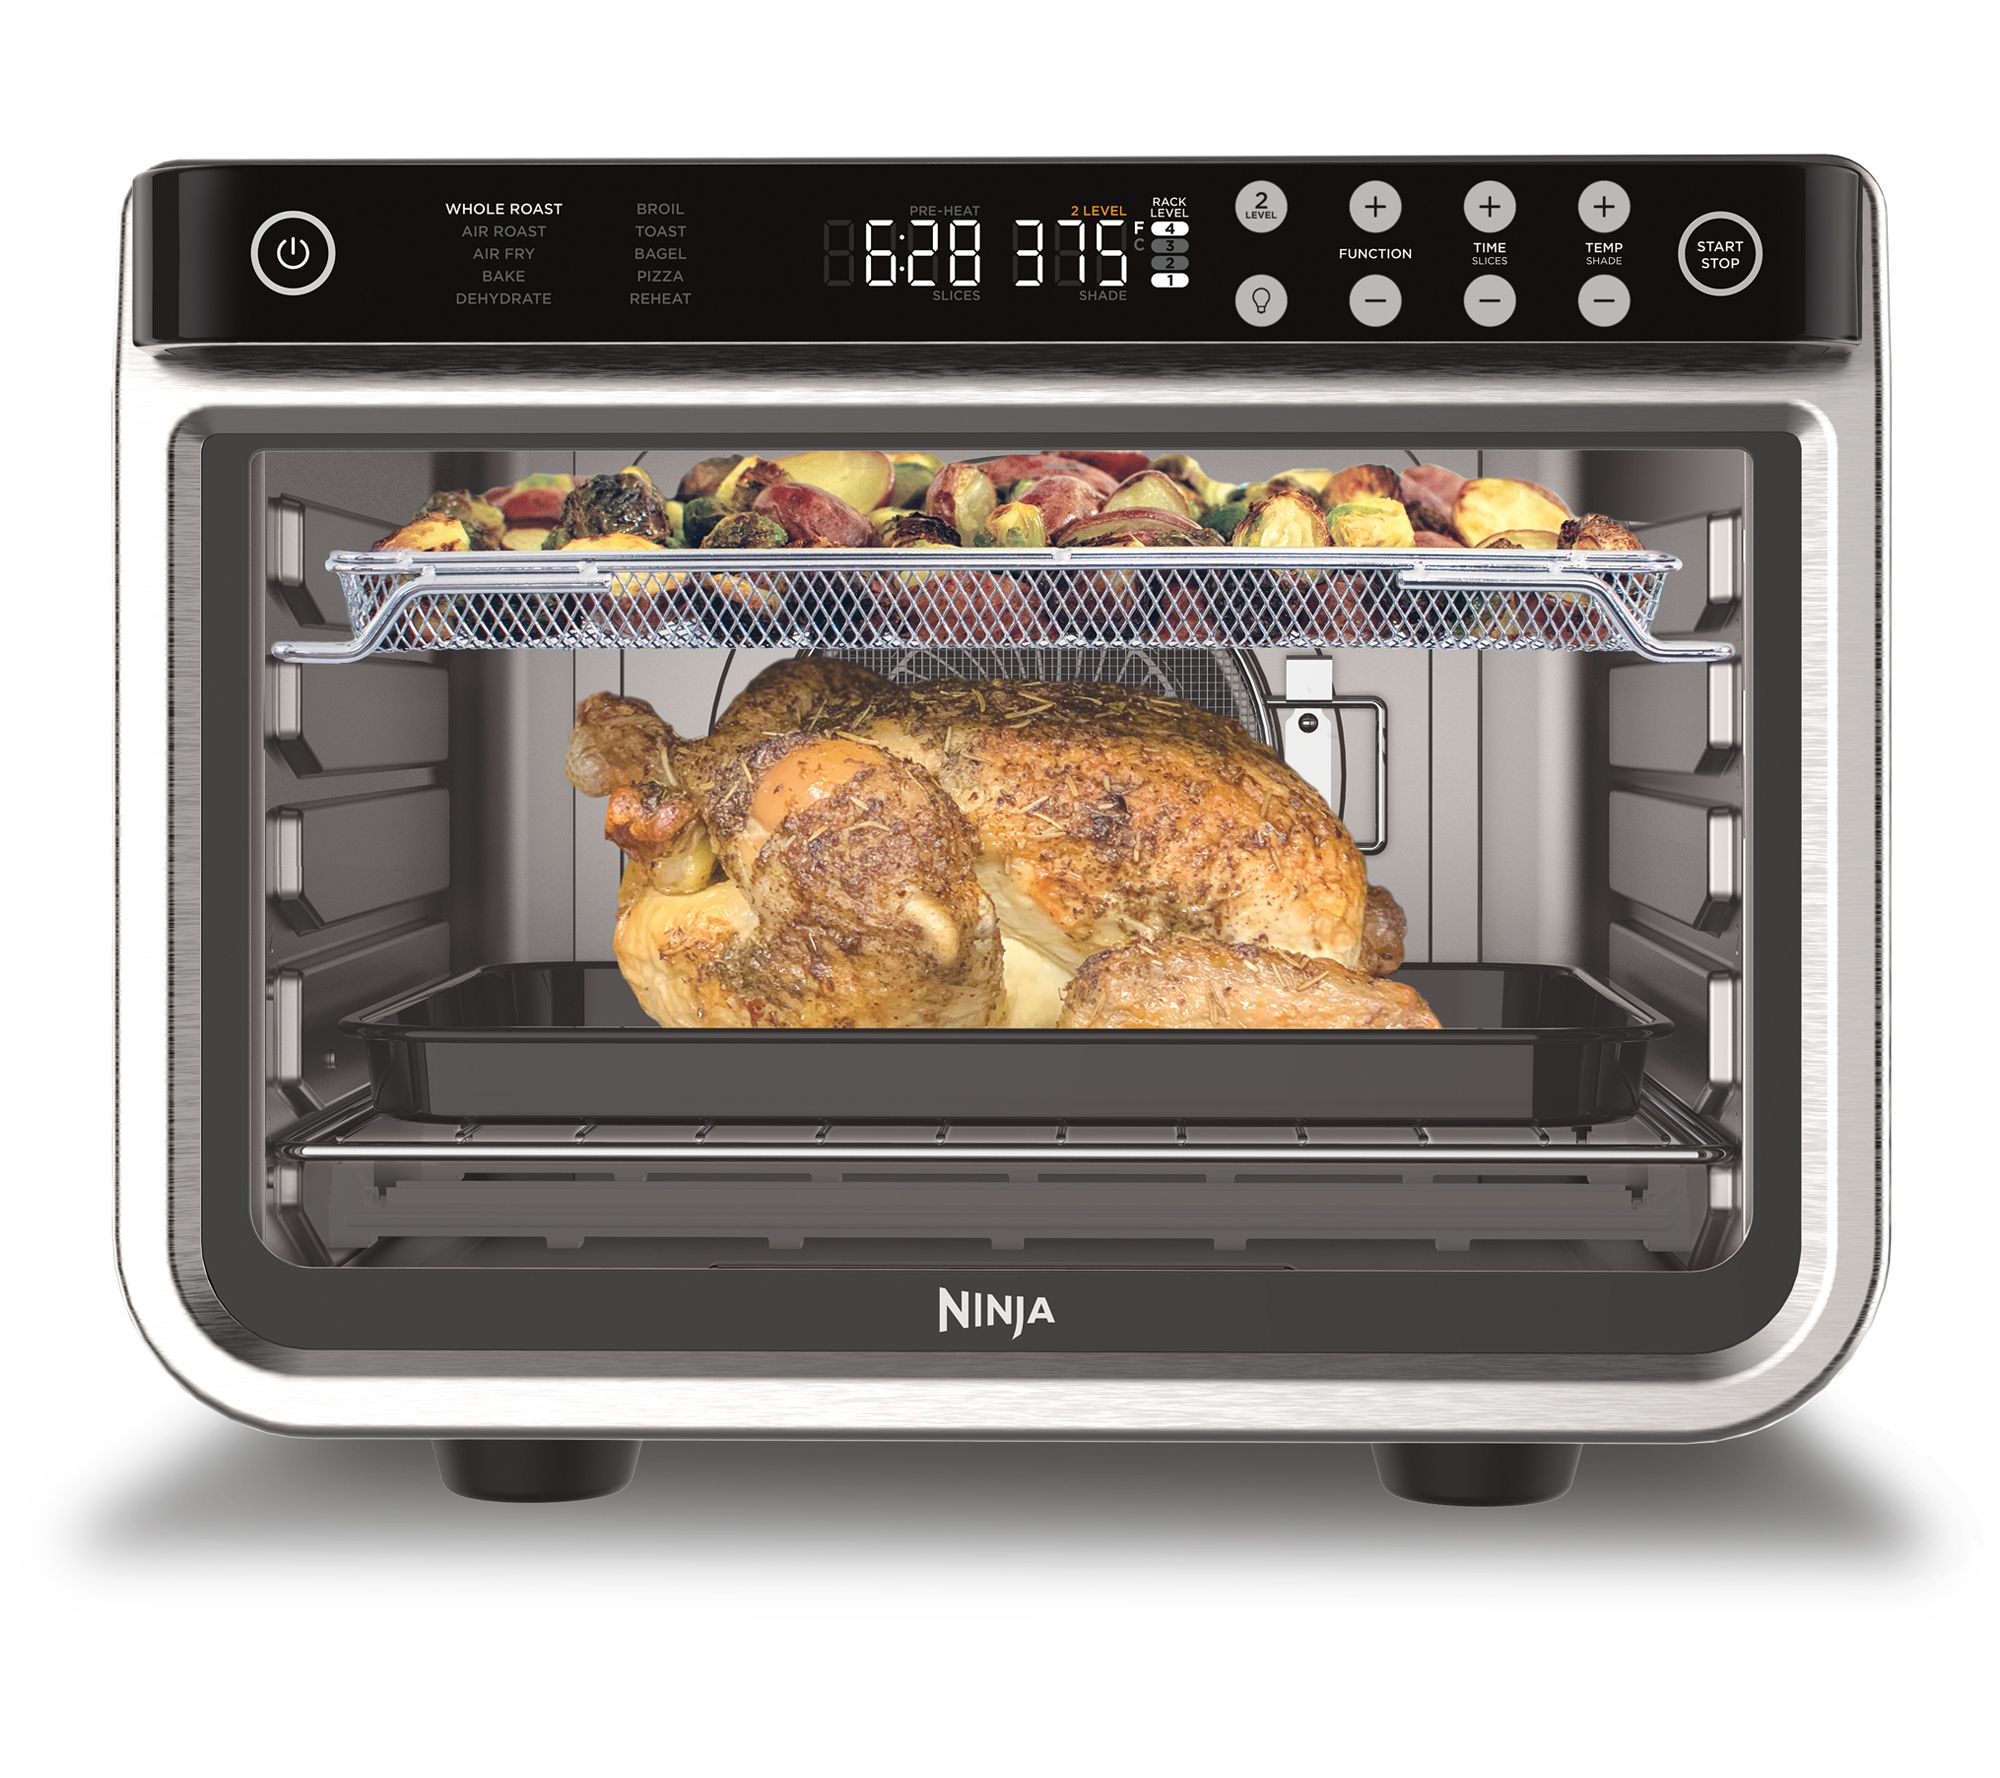 Today Only: QVC Is Offering the Ninja Foodi Double Oven for $240 (Save $90)  - CNET